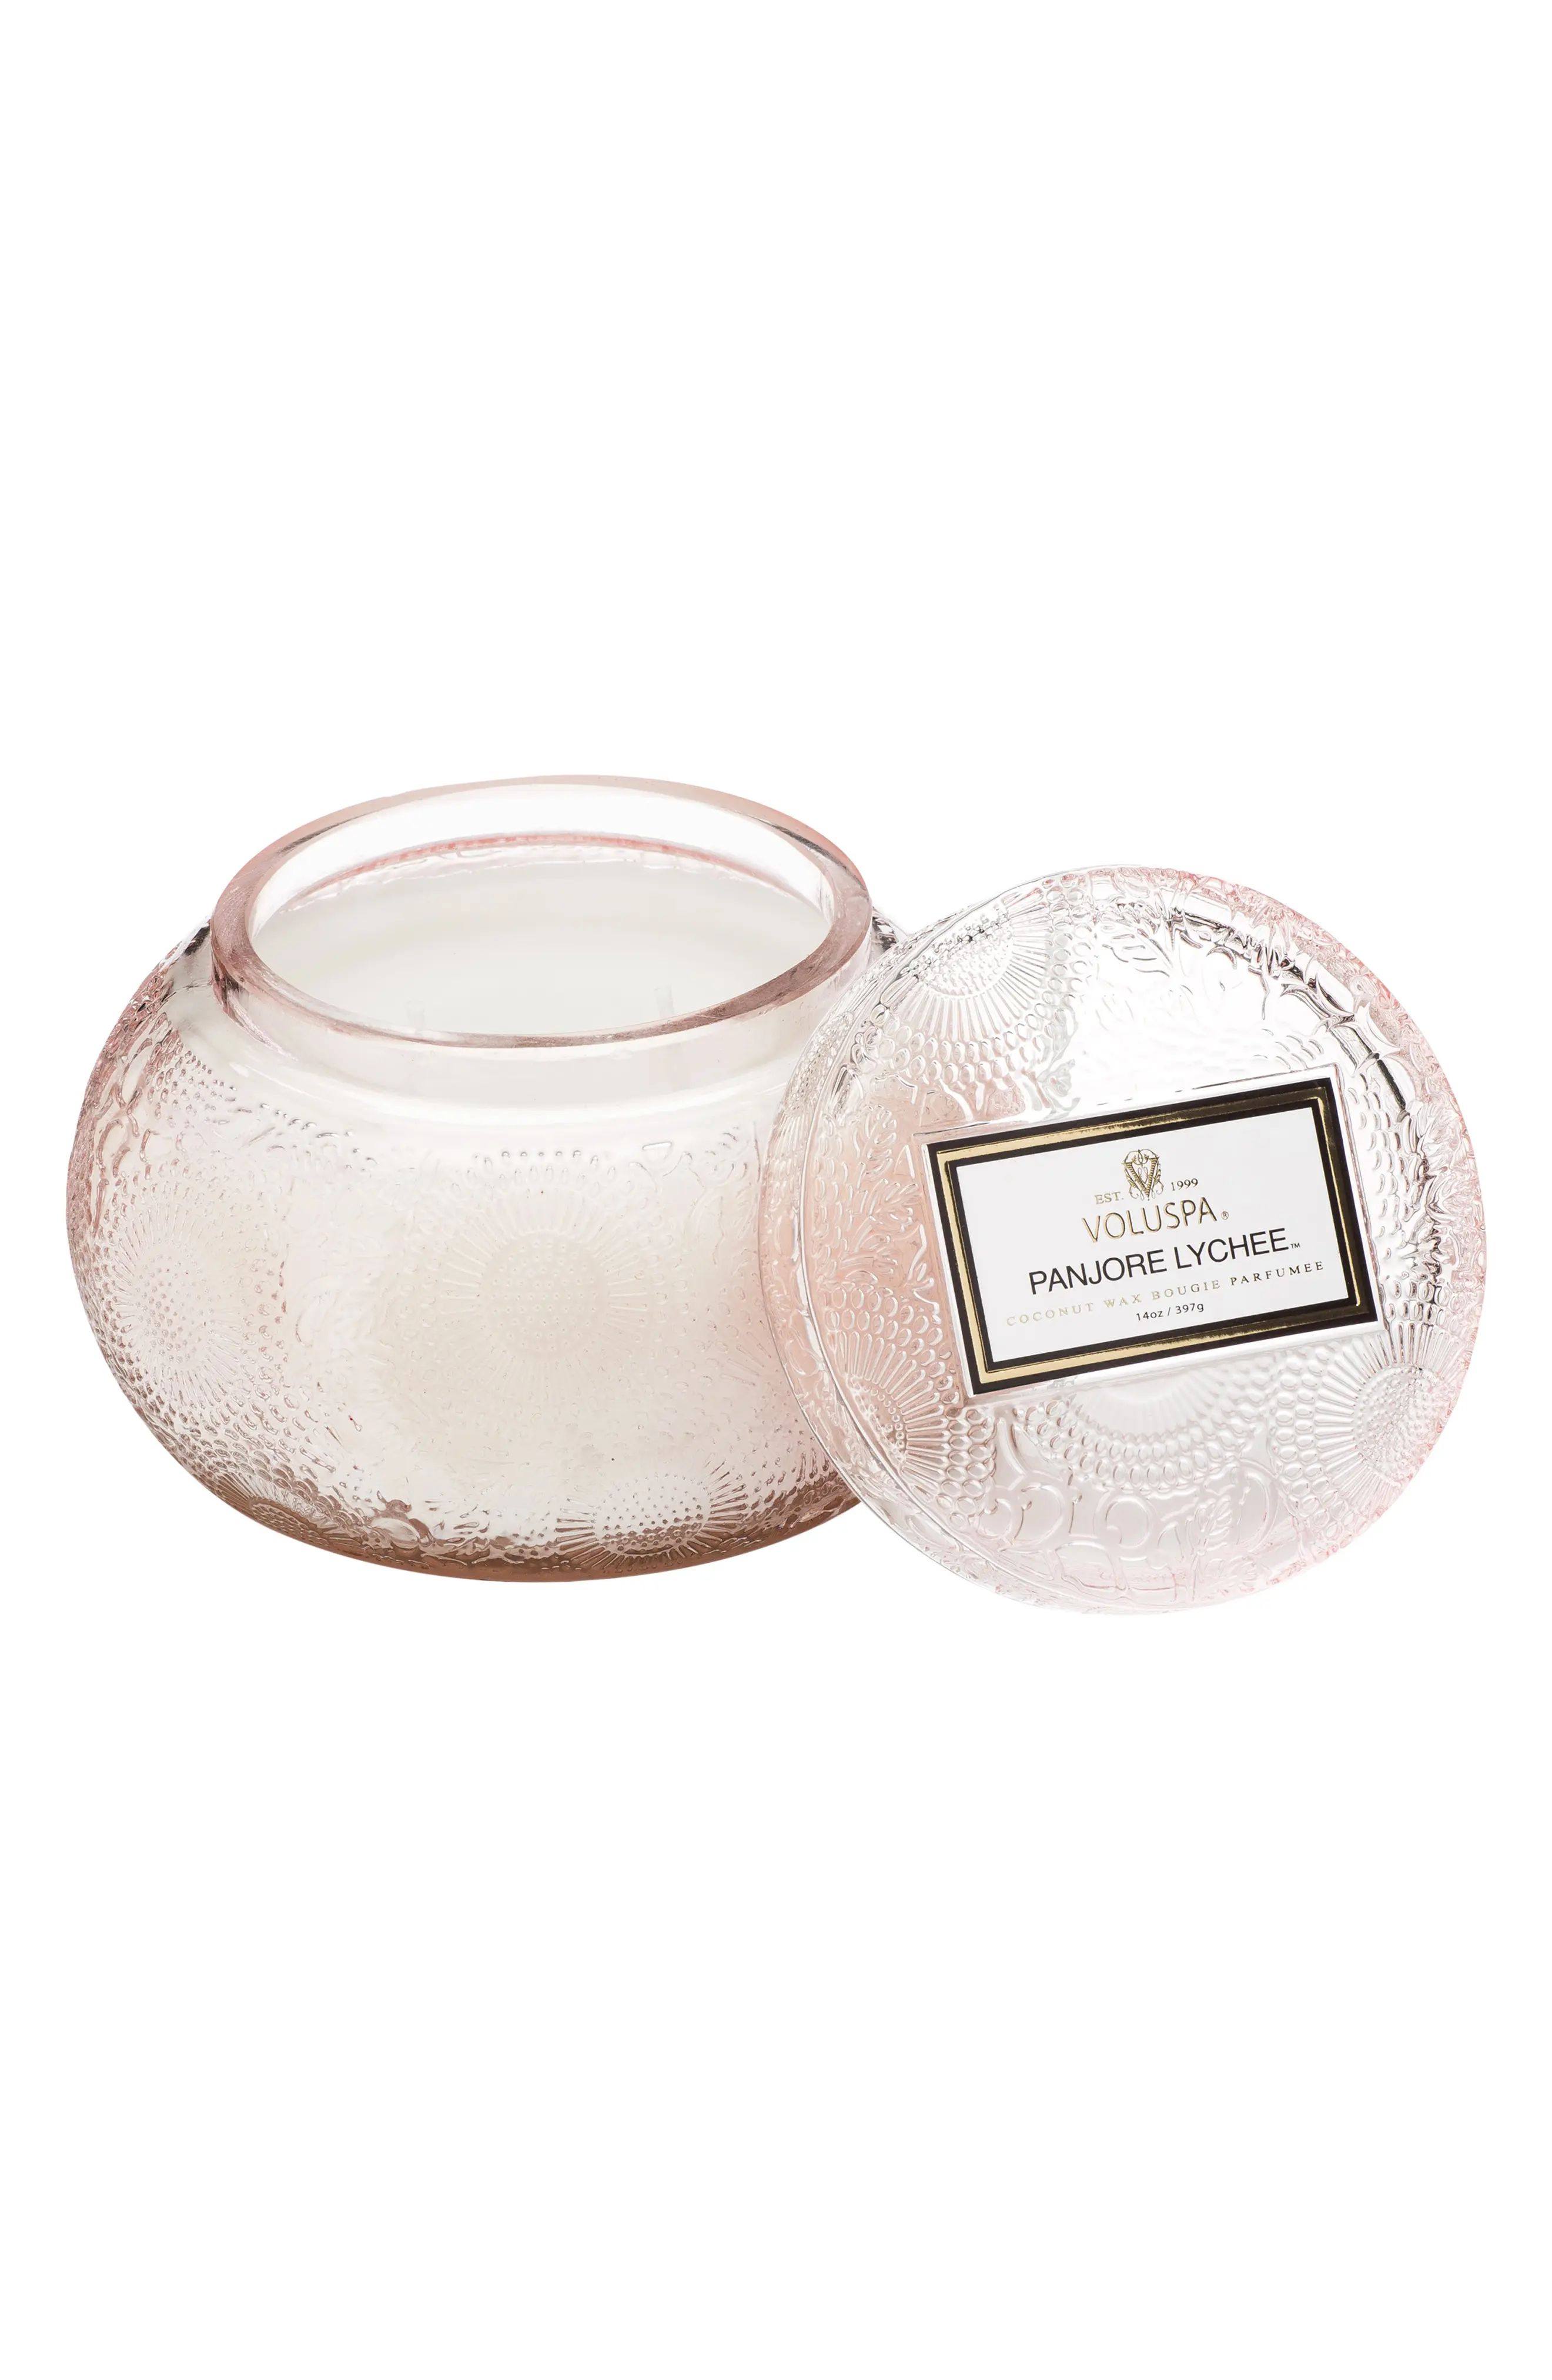 Voluspa Volupsa Japonica Chawan Bowl Two-Wick Embossed Glass Candle in Panjore Lychee at Nordstrom | Nordstrom